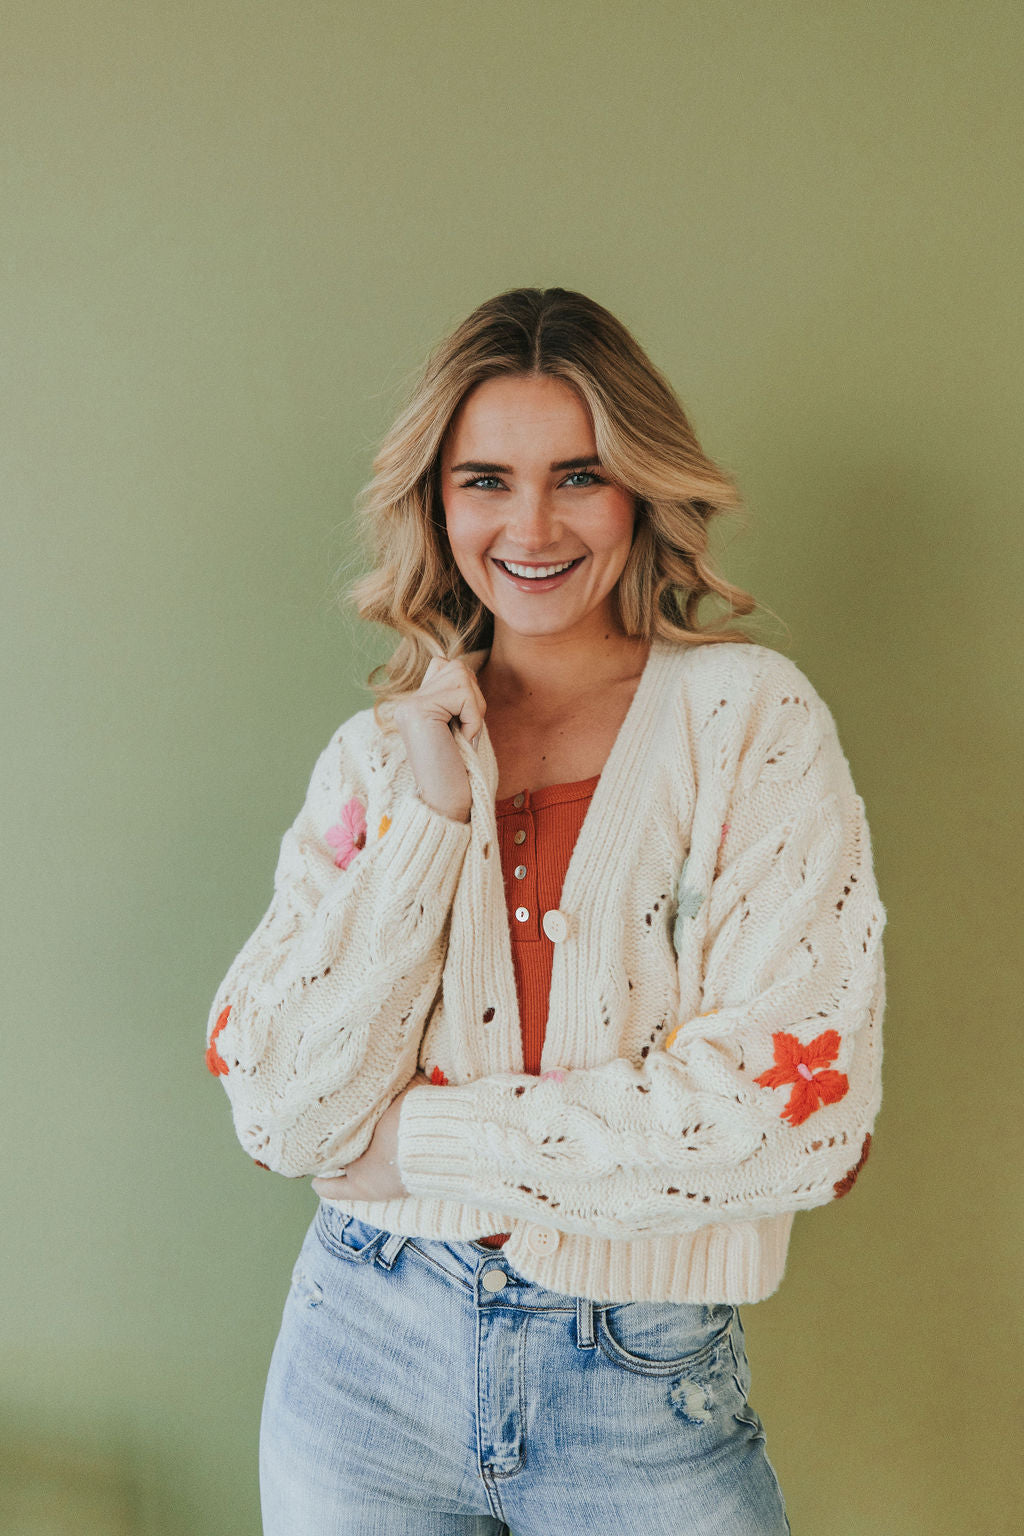 All For You Floral Embroidered Sweater Cardigan